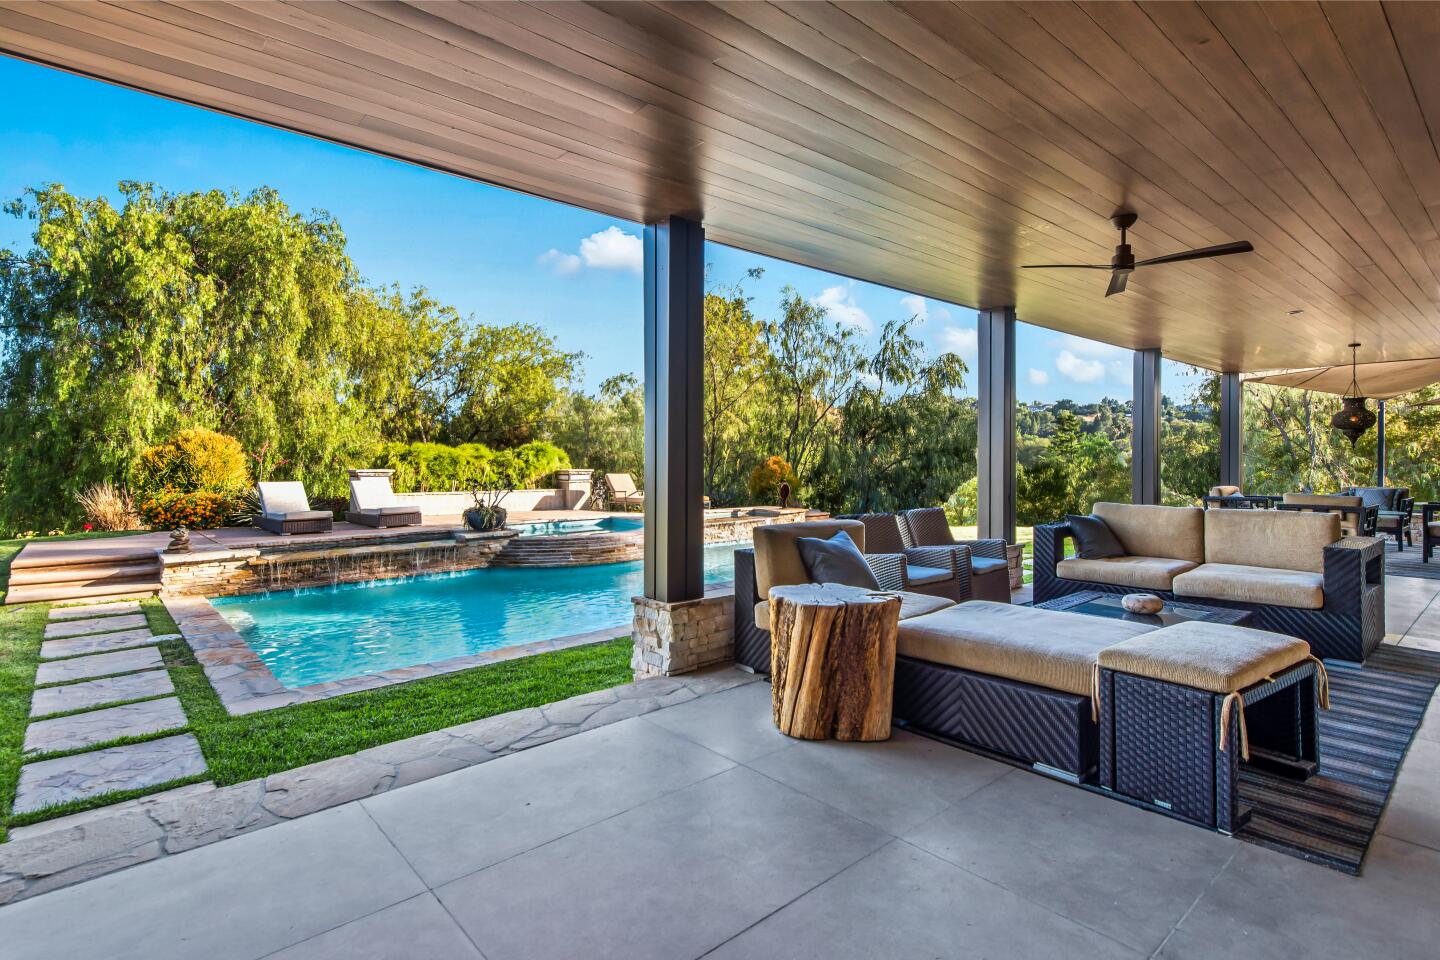 The patio has furniture, a pool nearby and trees in the background.